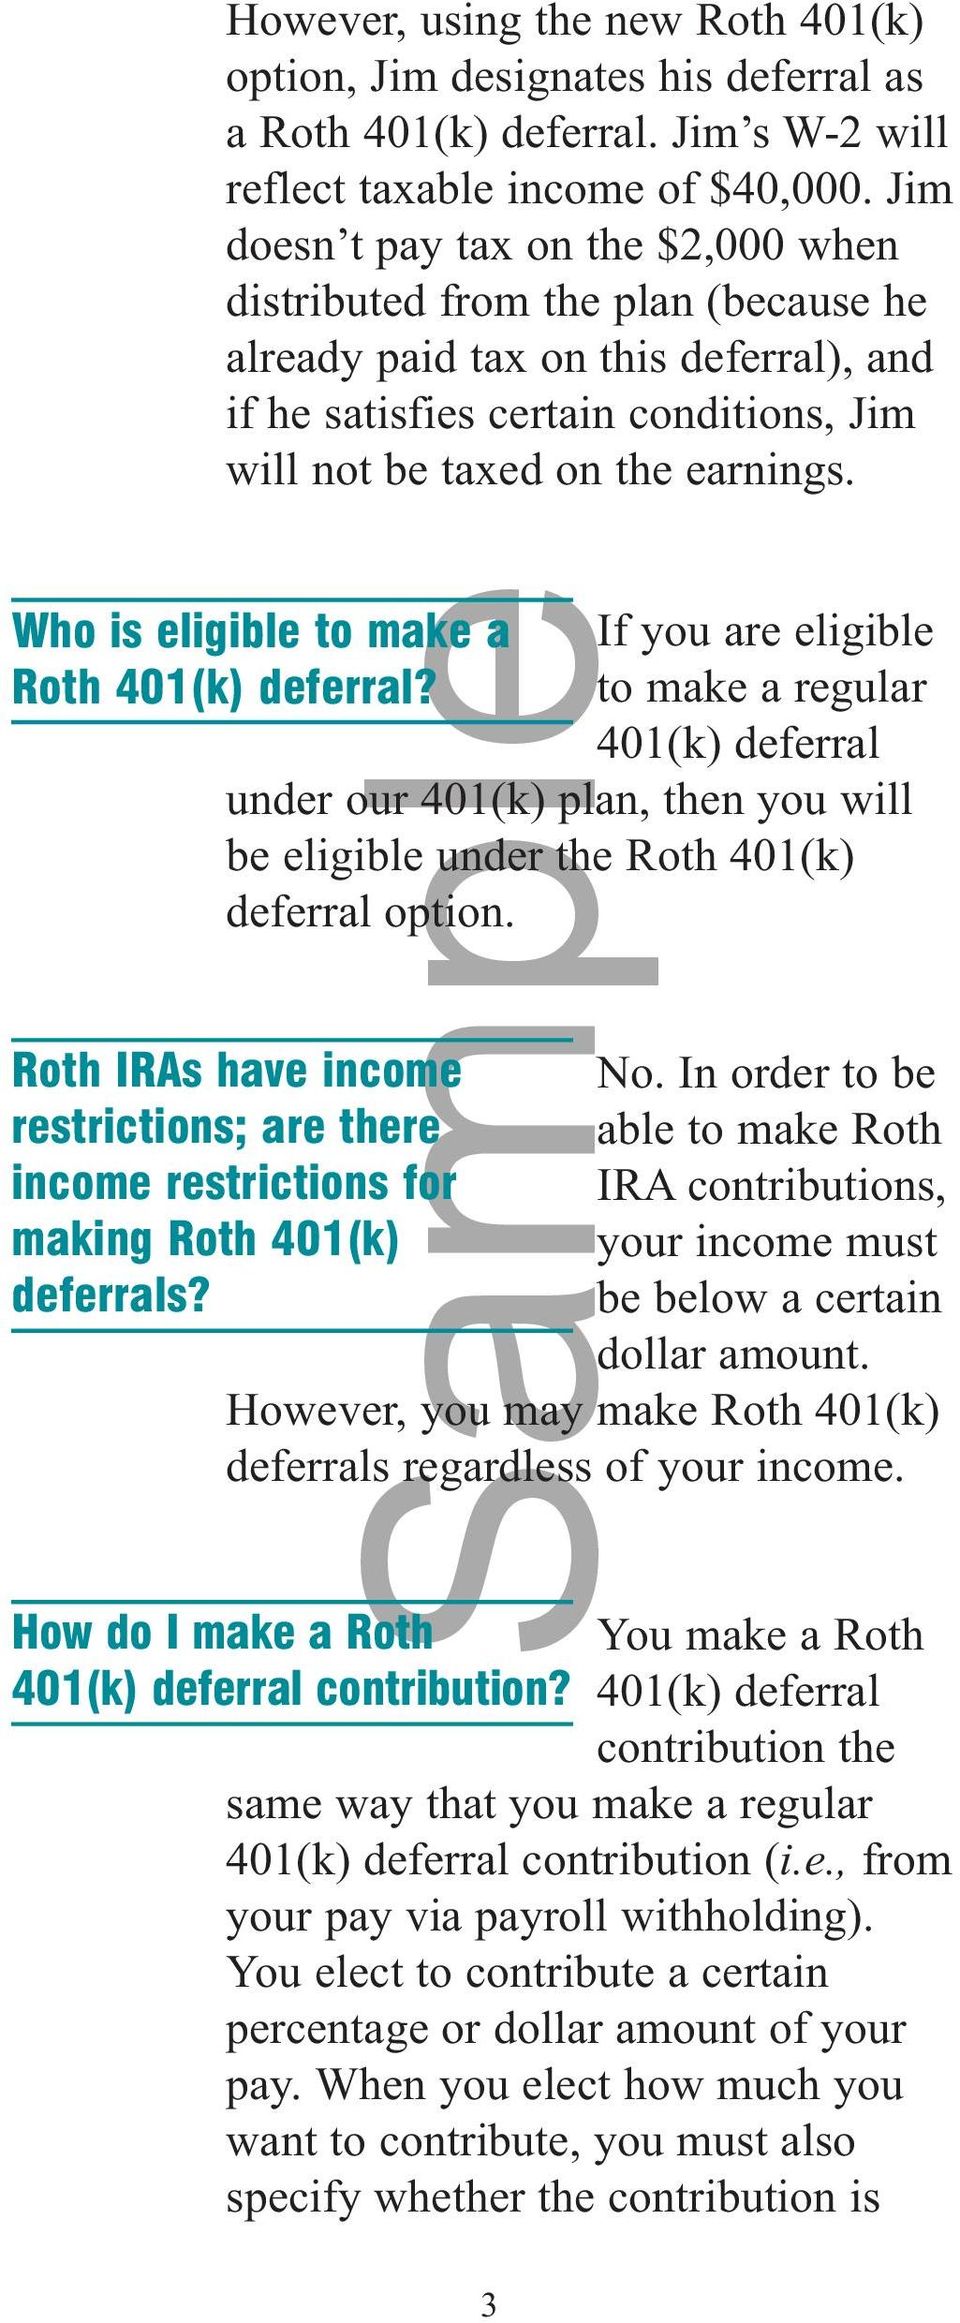 Who is eligible to make a If you are eligible Roth 401(k) deferral? to make a regular 401(k) deferral under our 401(k) plan, then you will be eligible under the Roth 401(k) deferral option.